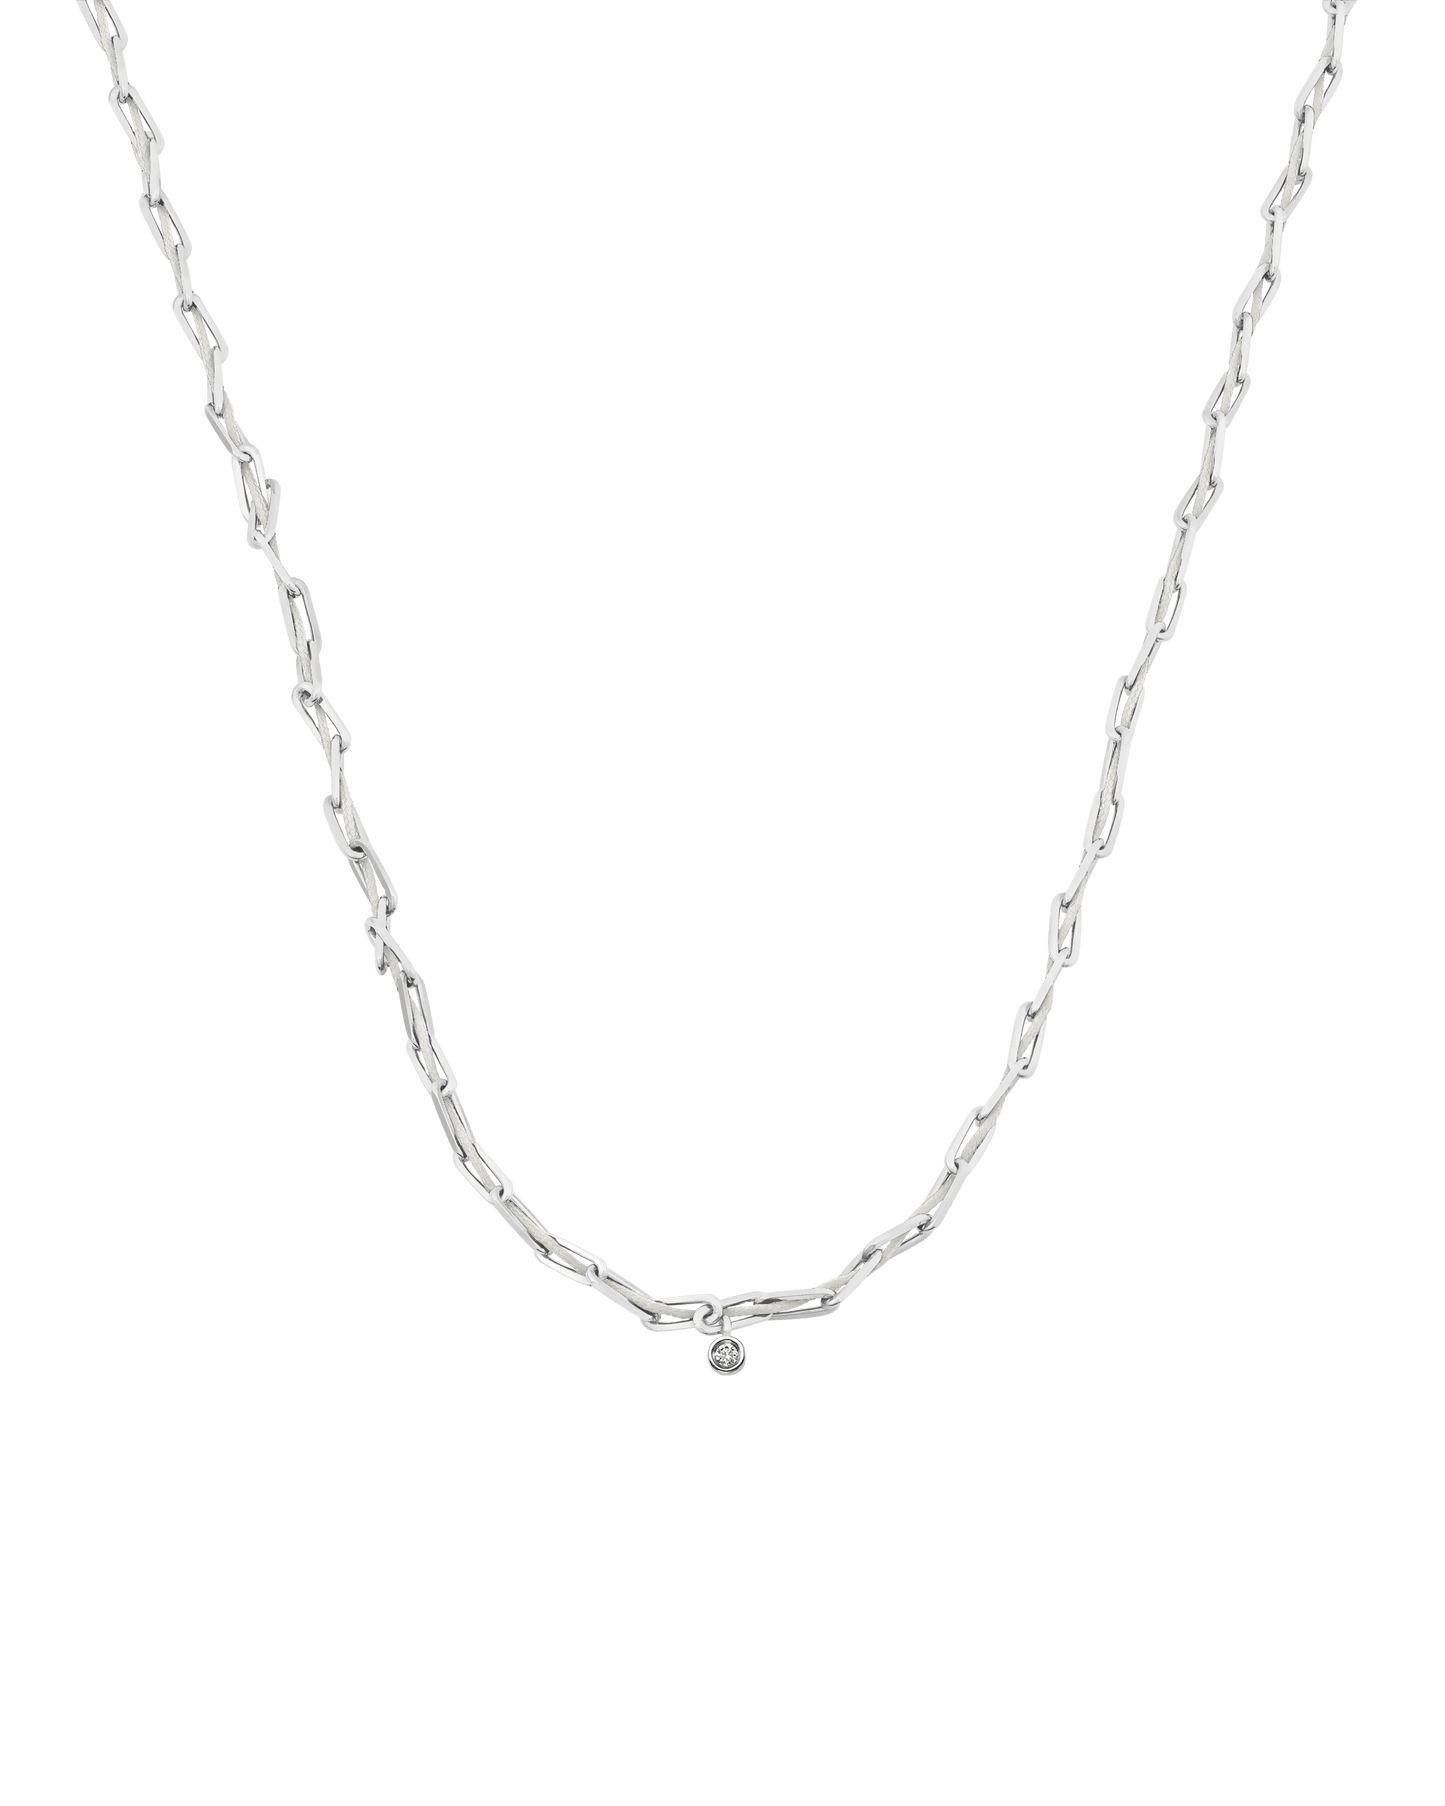 Twine Diamond Necklace - 925 Sterling Silver Necklaces magal-dev Pearl Small: 0.03ct 16"